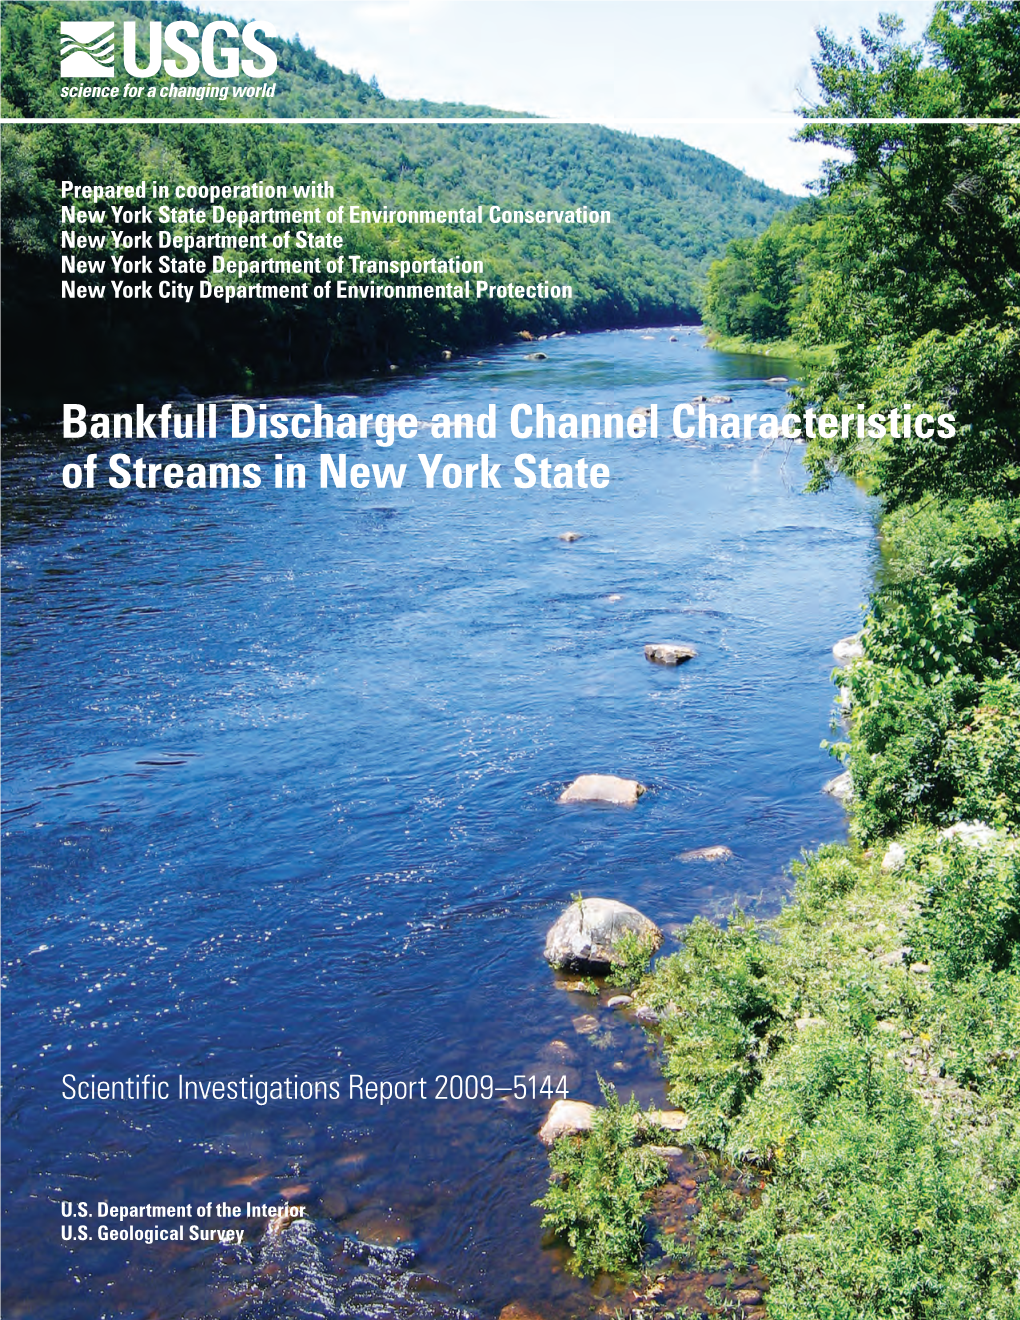 Bankfull Discharge and Channel Characteristics of Streams in New York State